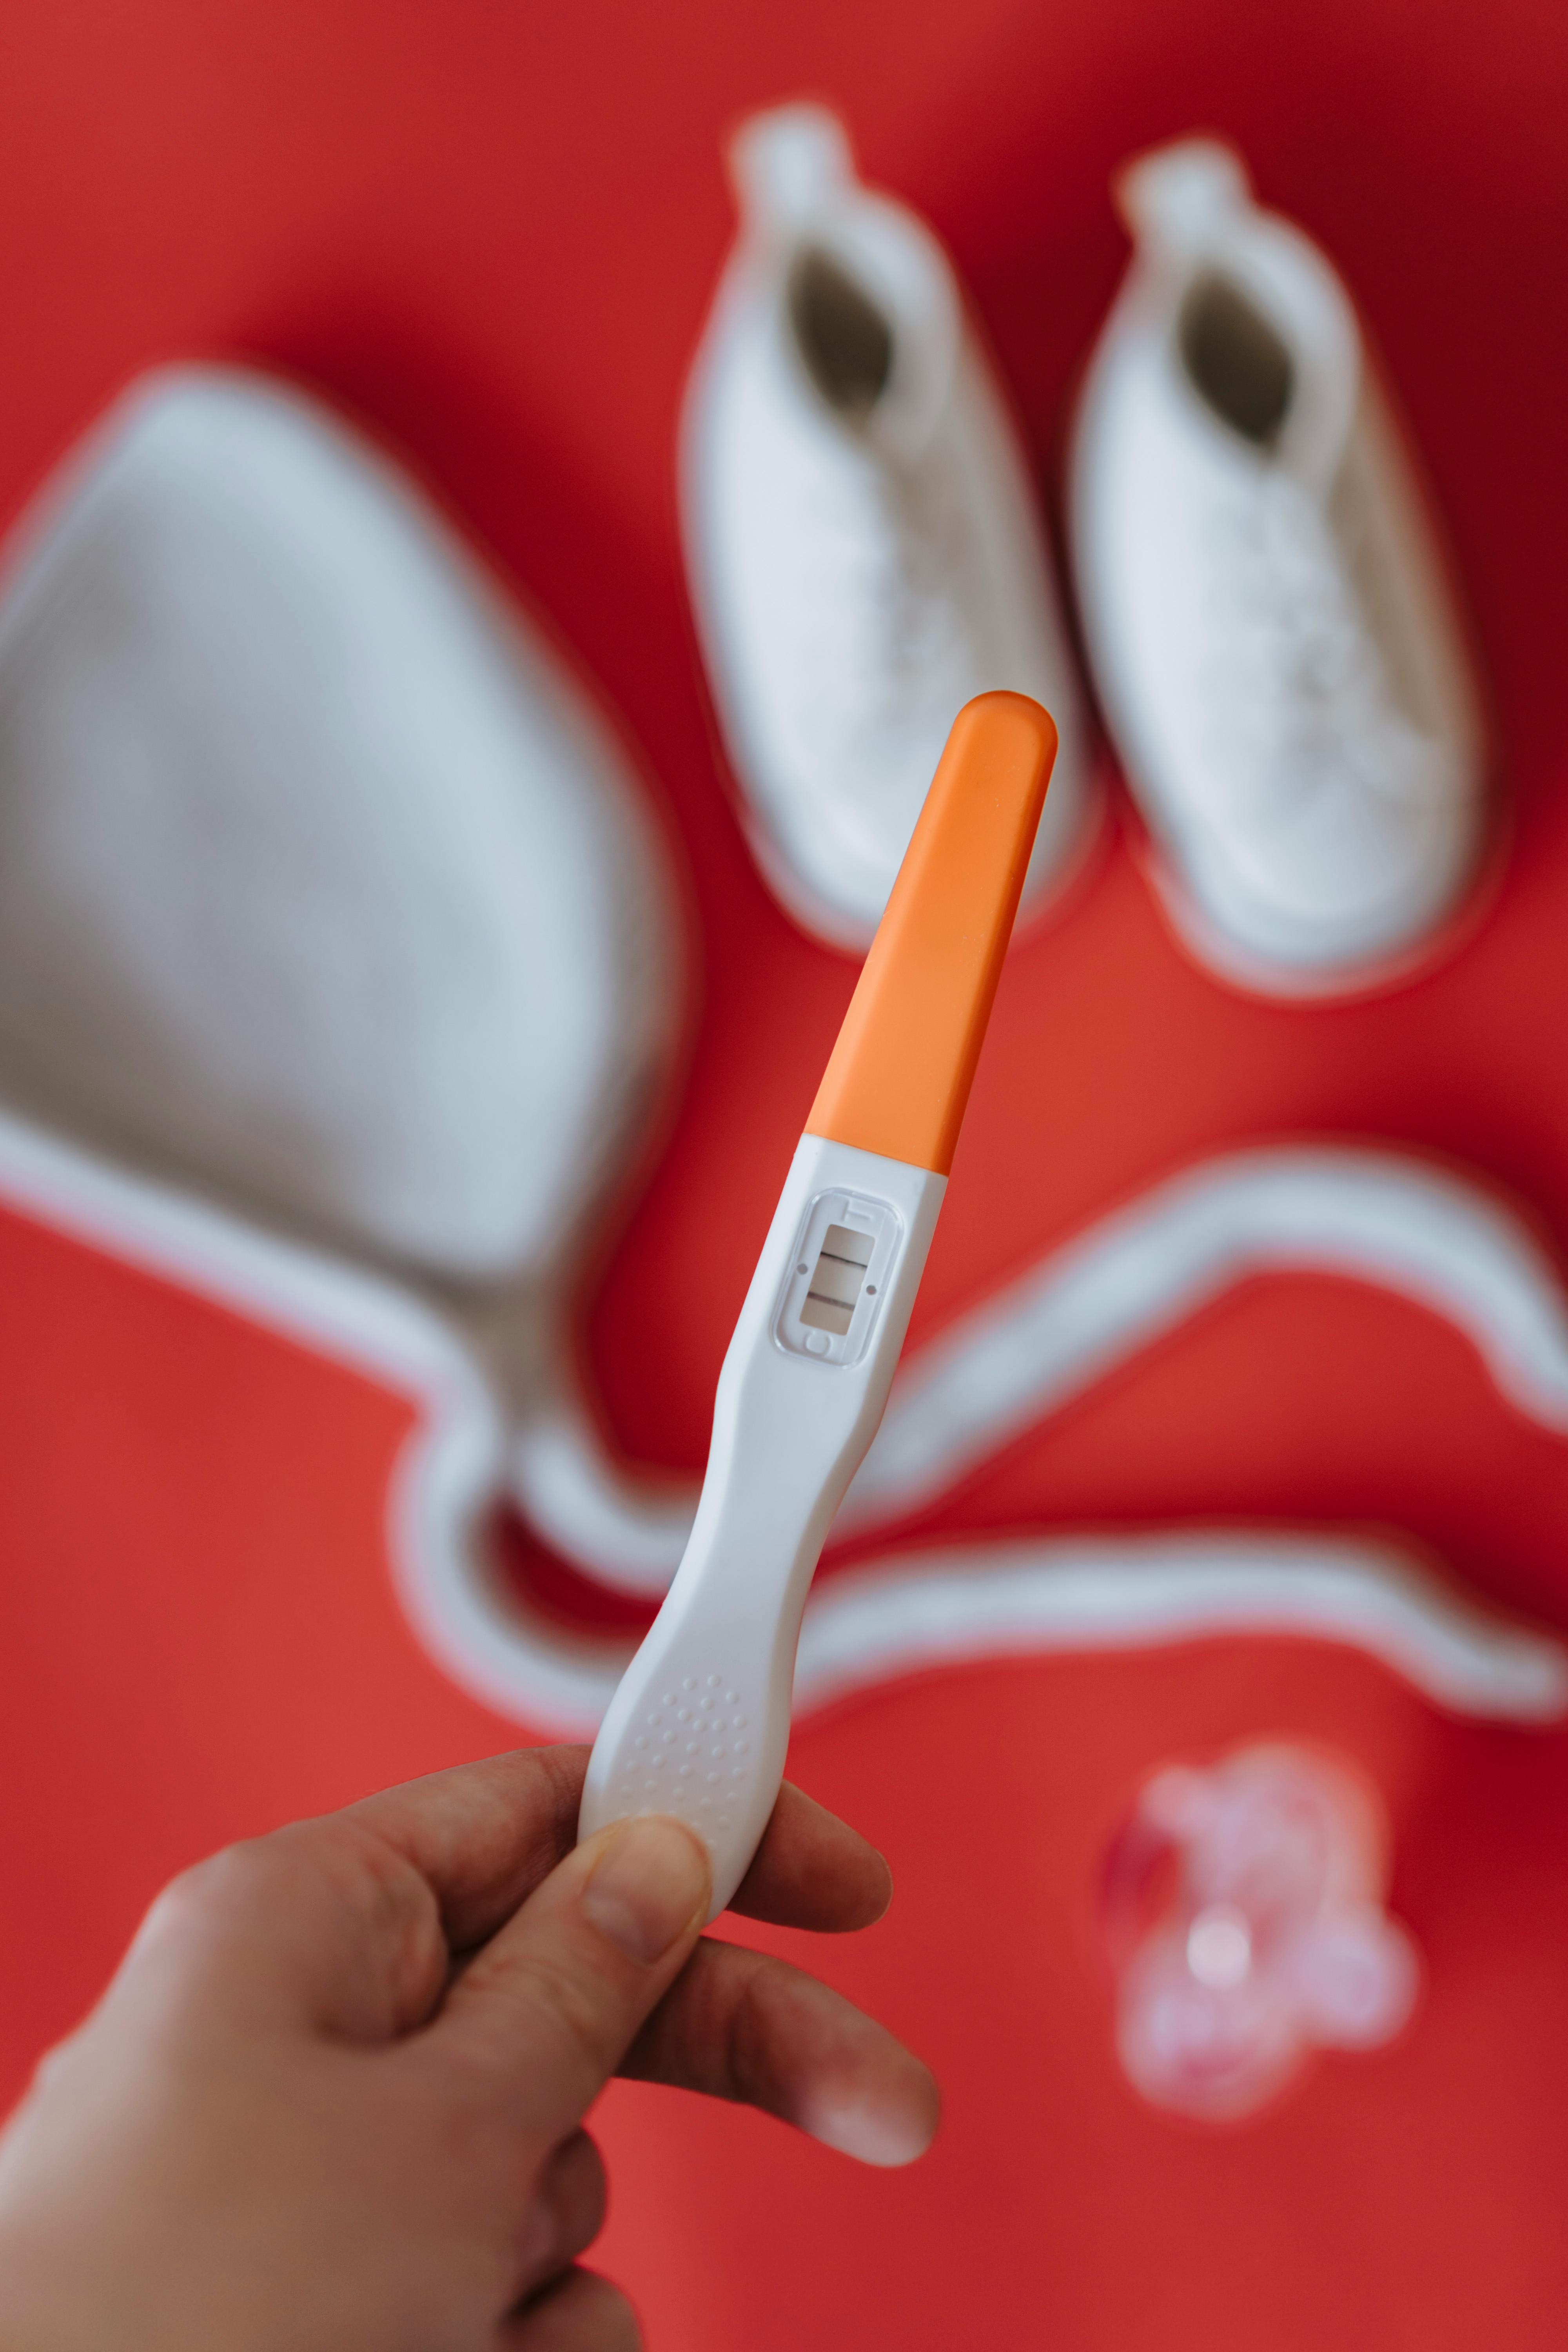 Someone holding positive pregnancy test while baby clothes appear faded in the background | Source: Pexels